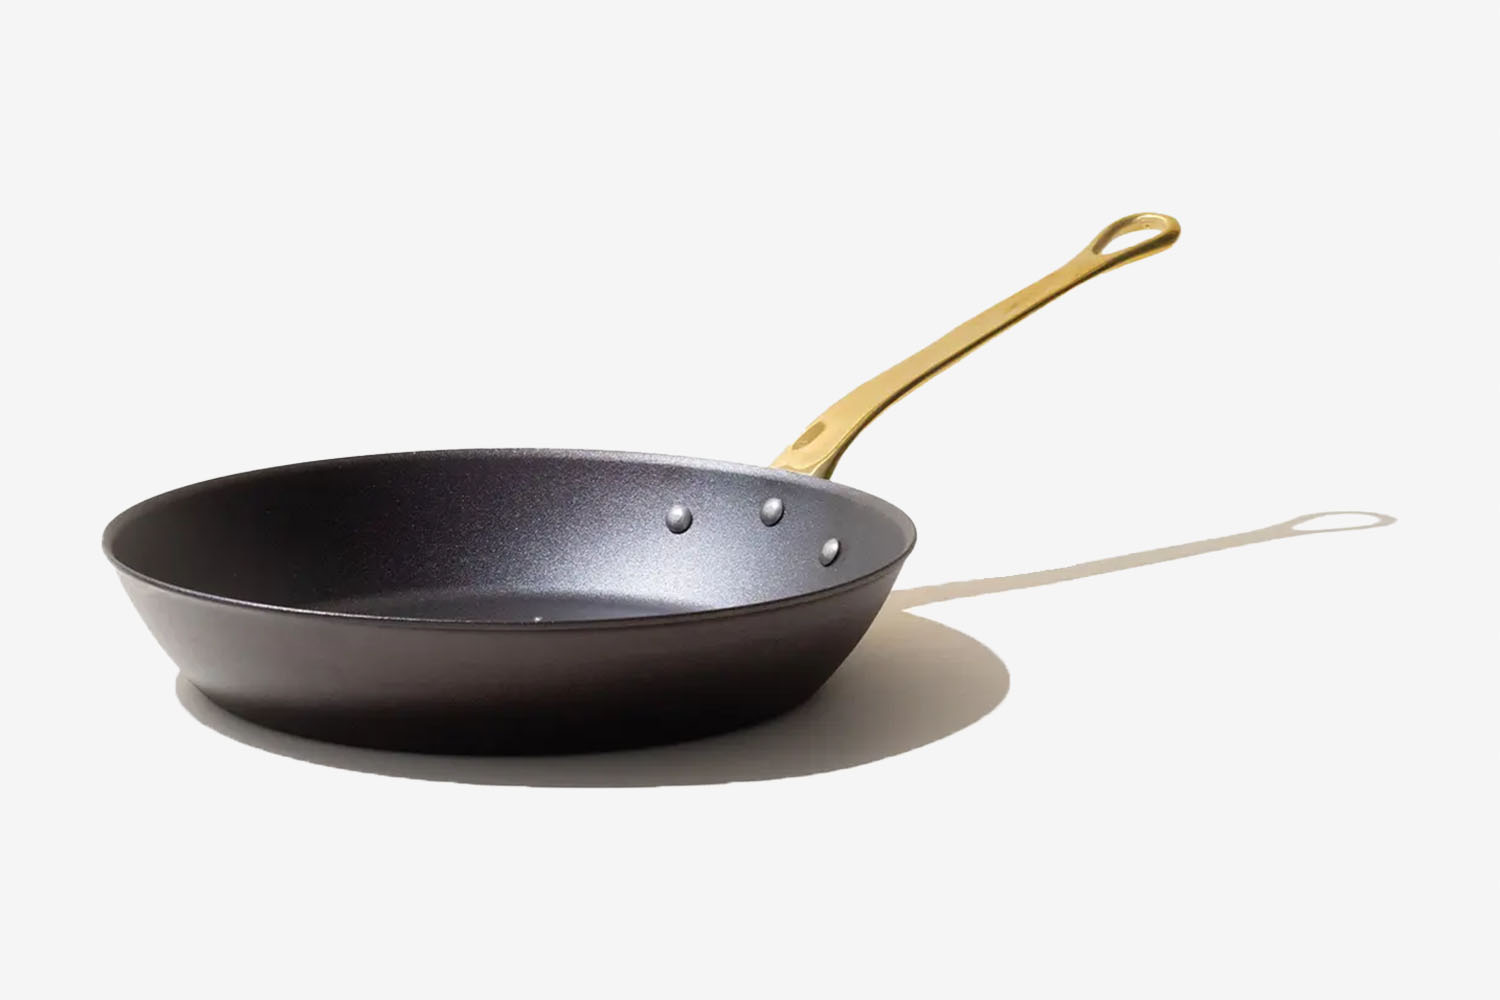 https://www.insidehook.com/wp-content/uploads/2023/11/Chef-Tom-Colicchio-x-Made-In-Carbon-Steel-Pan.jpg?fit=1200%2C800